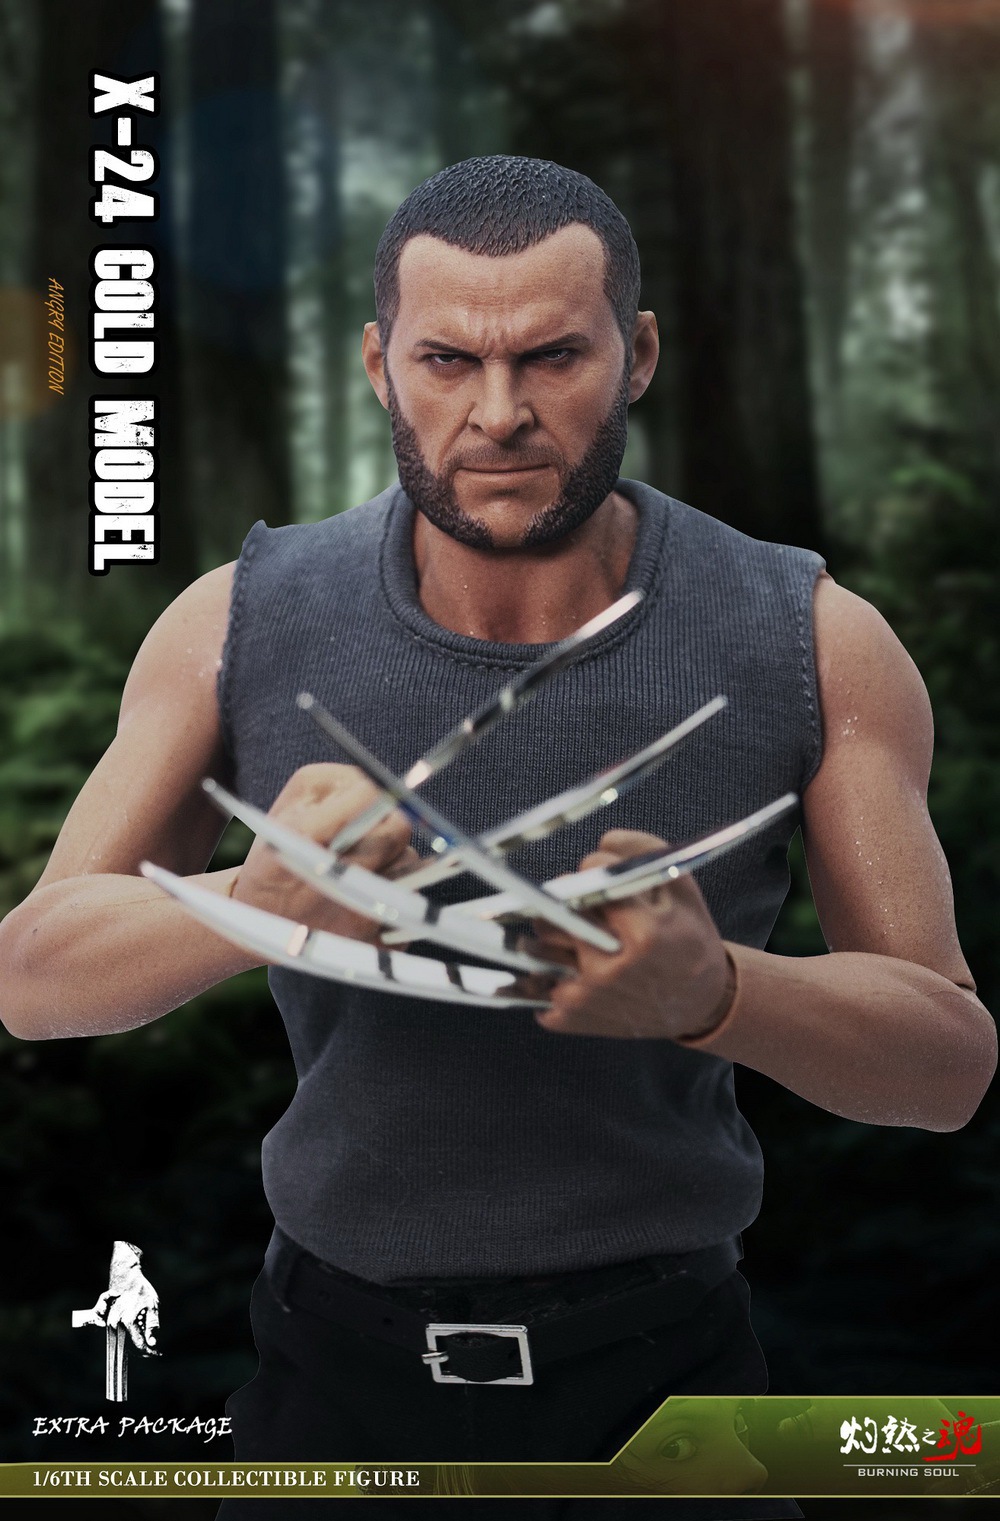 comicbook - NEW PRODUCT: Burning Soul: 1/6 Wolverine Villain X24 Normal and Damaged Action Figure 84a7bf10